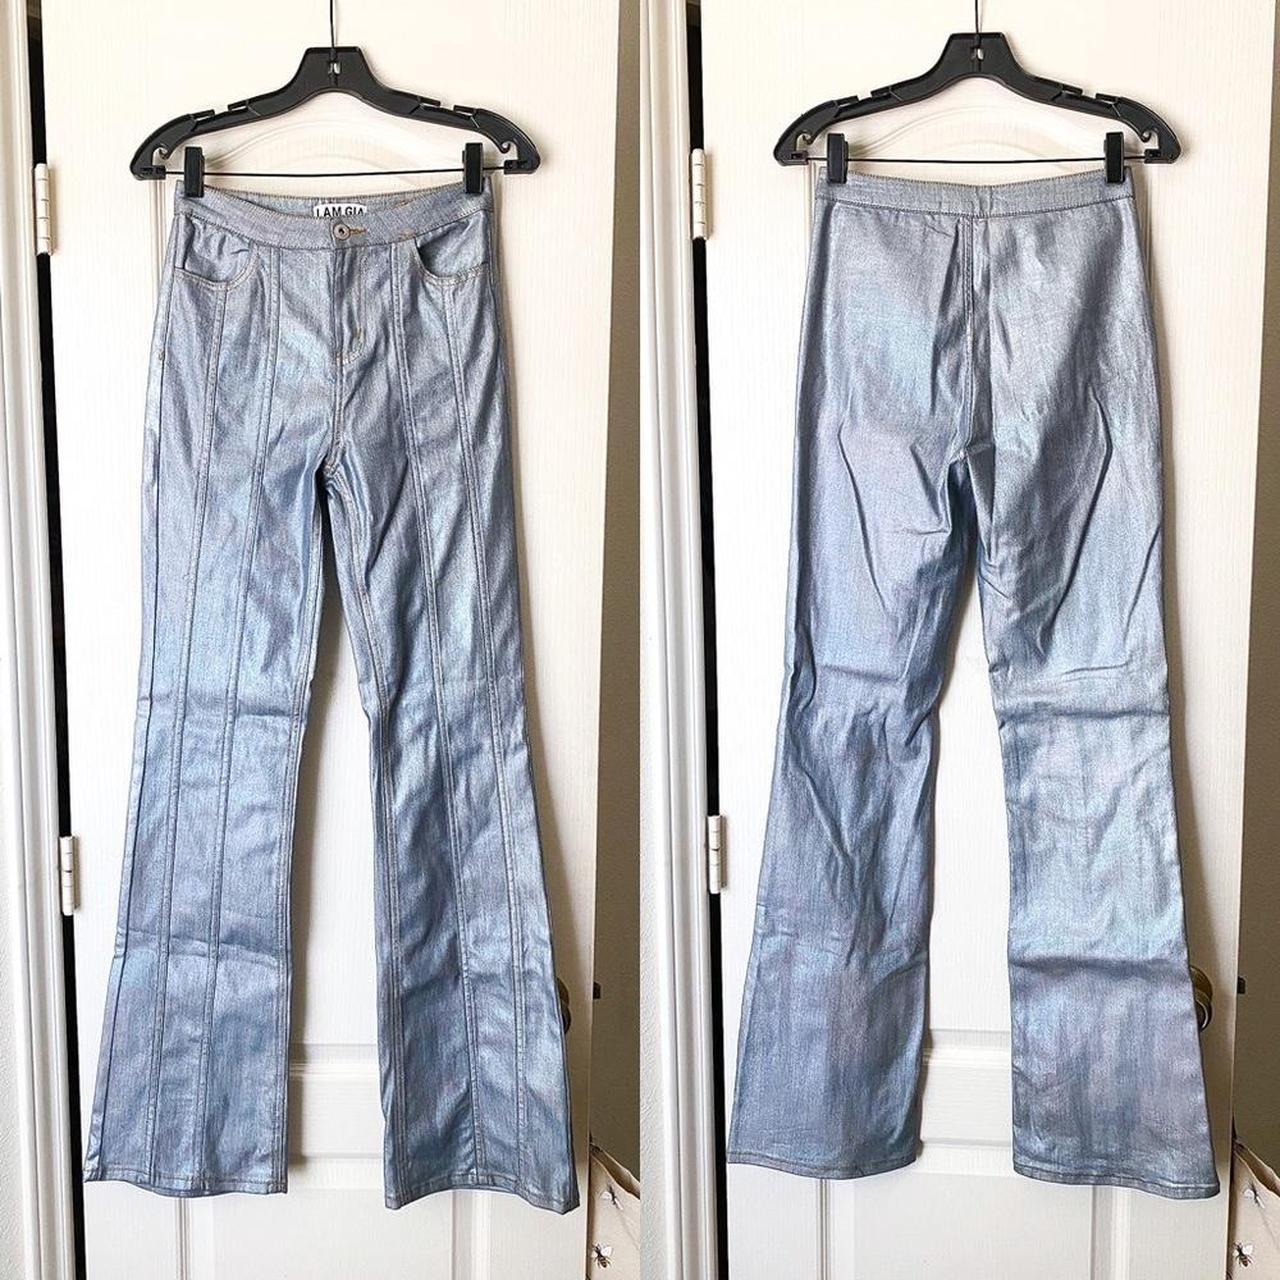 Product Image 2 - IAMGIA Ximena Pant
Color: Silver
Size: XS